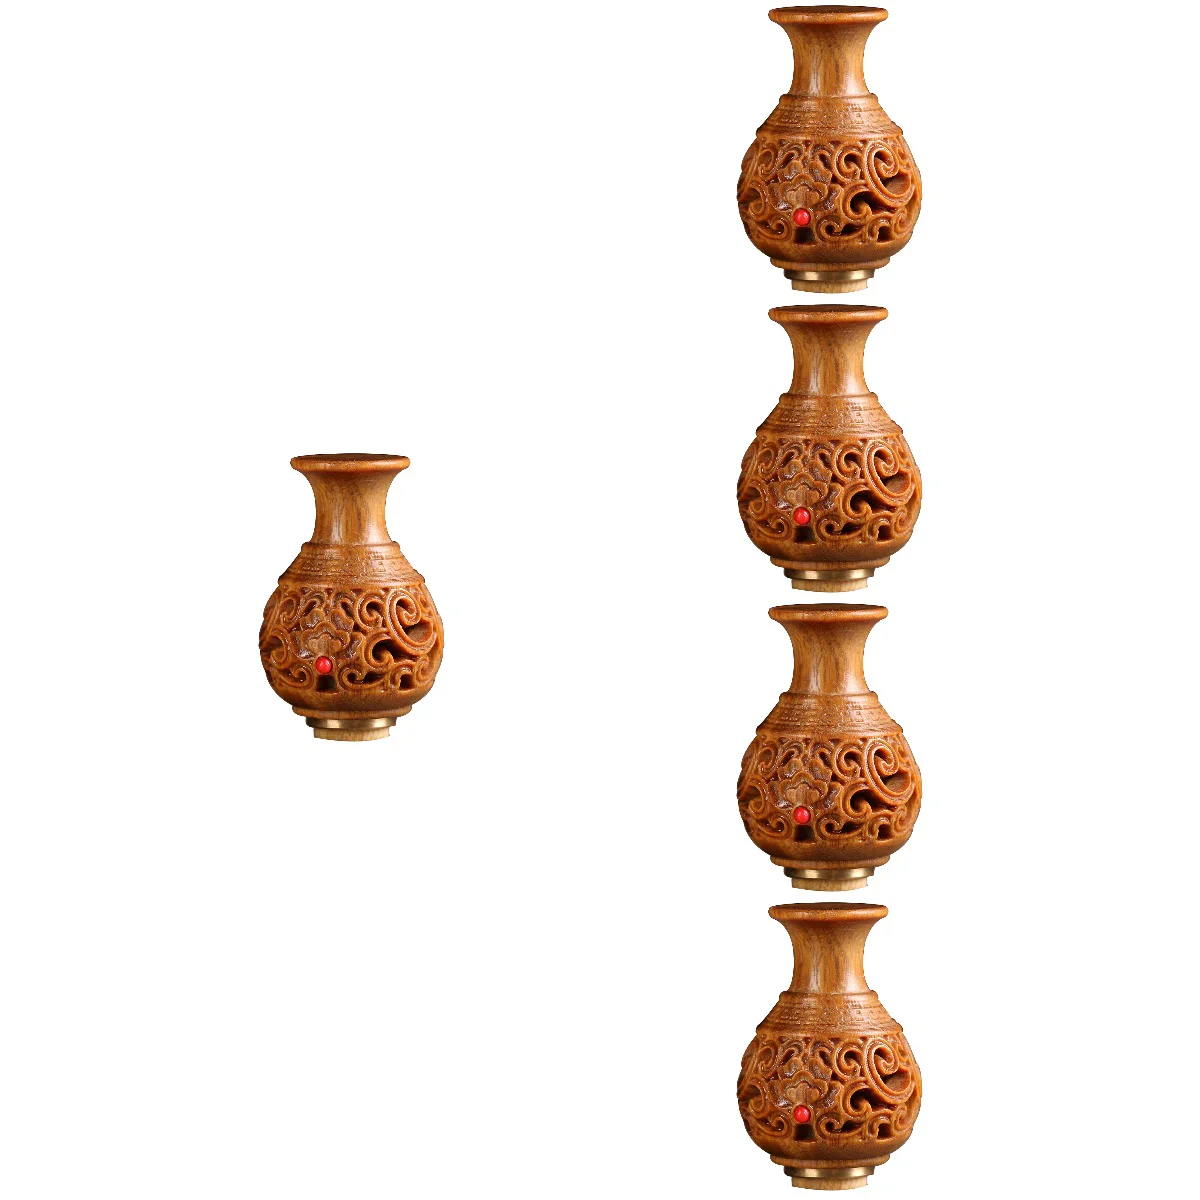 

5x Creative Premium Exquisite Elegant Carving Vase Statue Openable Aroma Beads Holder for Home Decor Gift Option Car Ornament